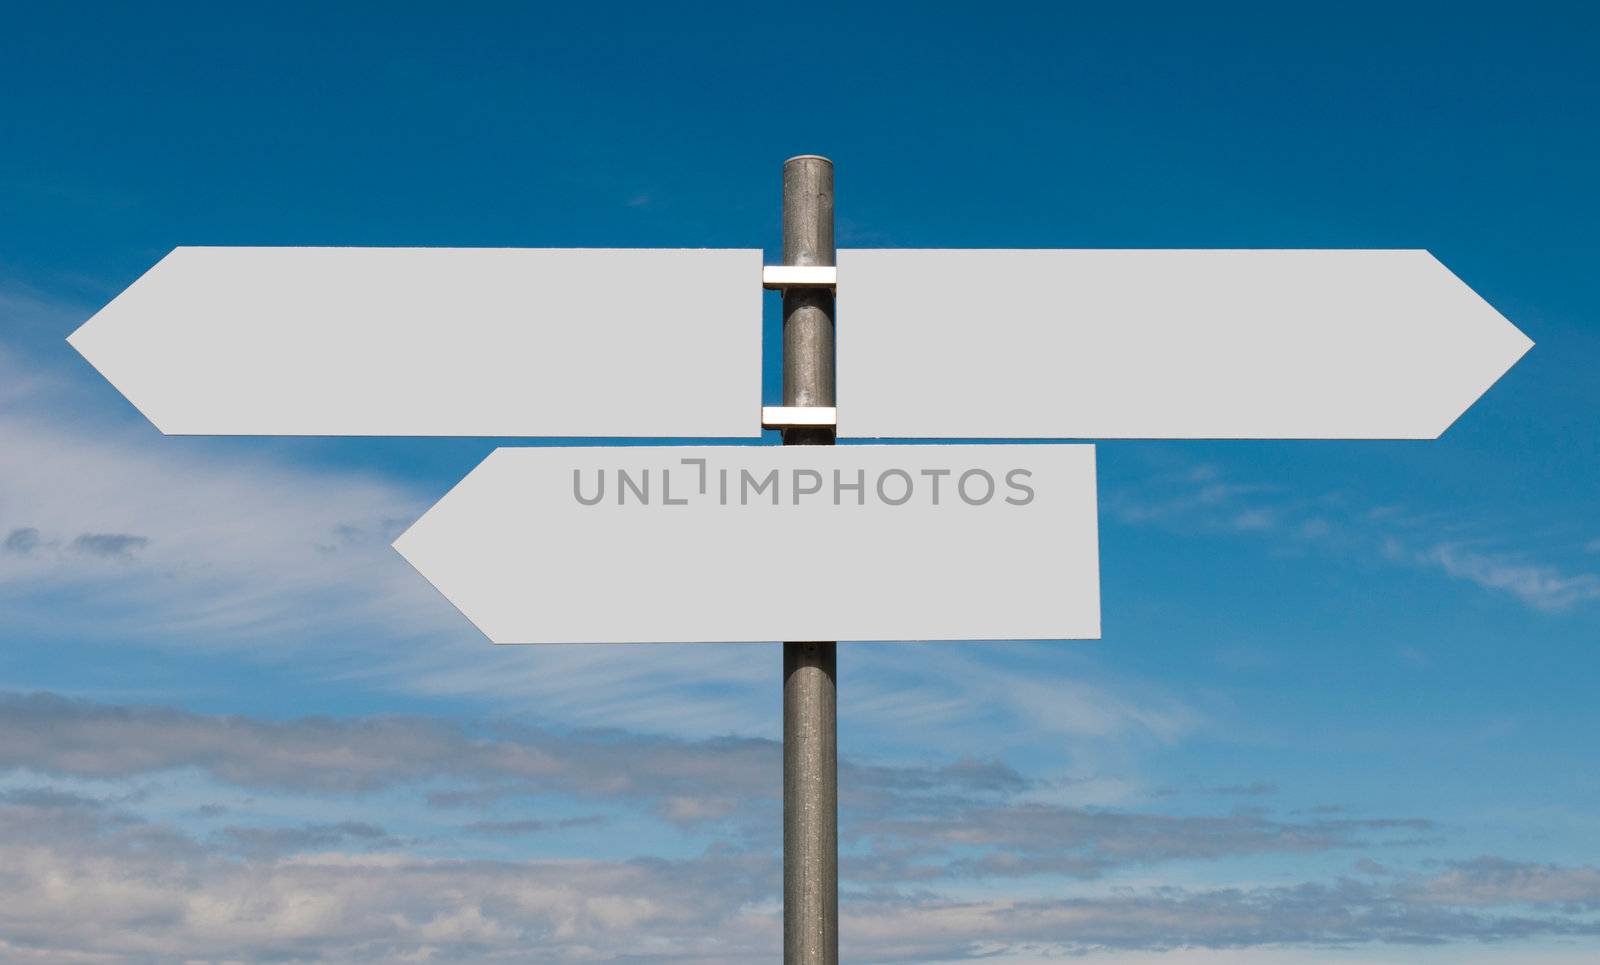 Multidirectional sign by luissantos84